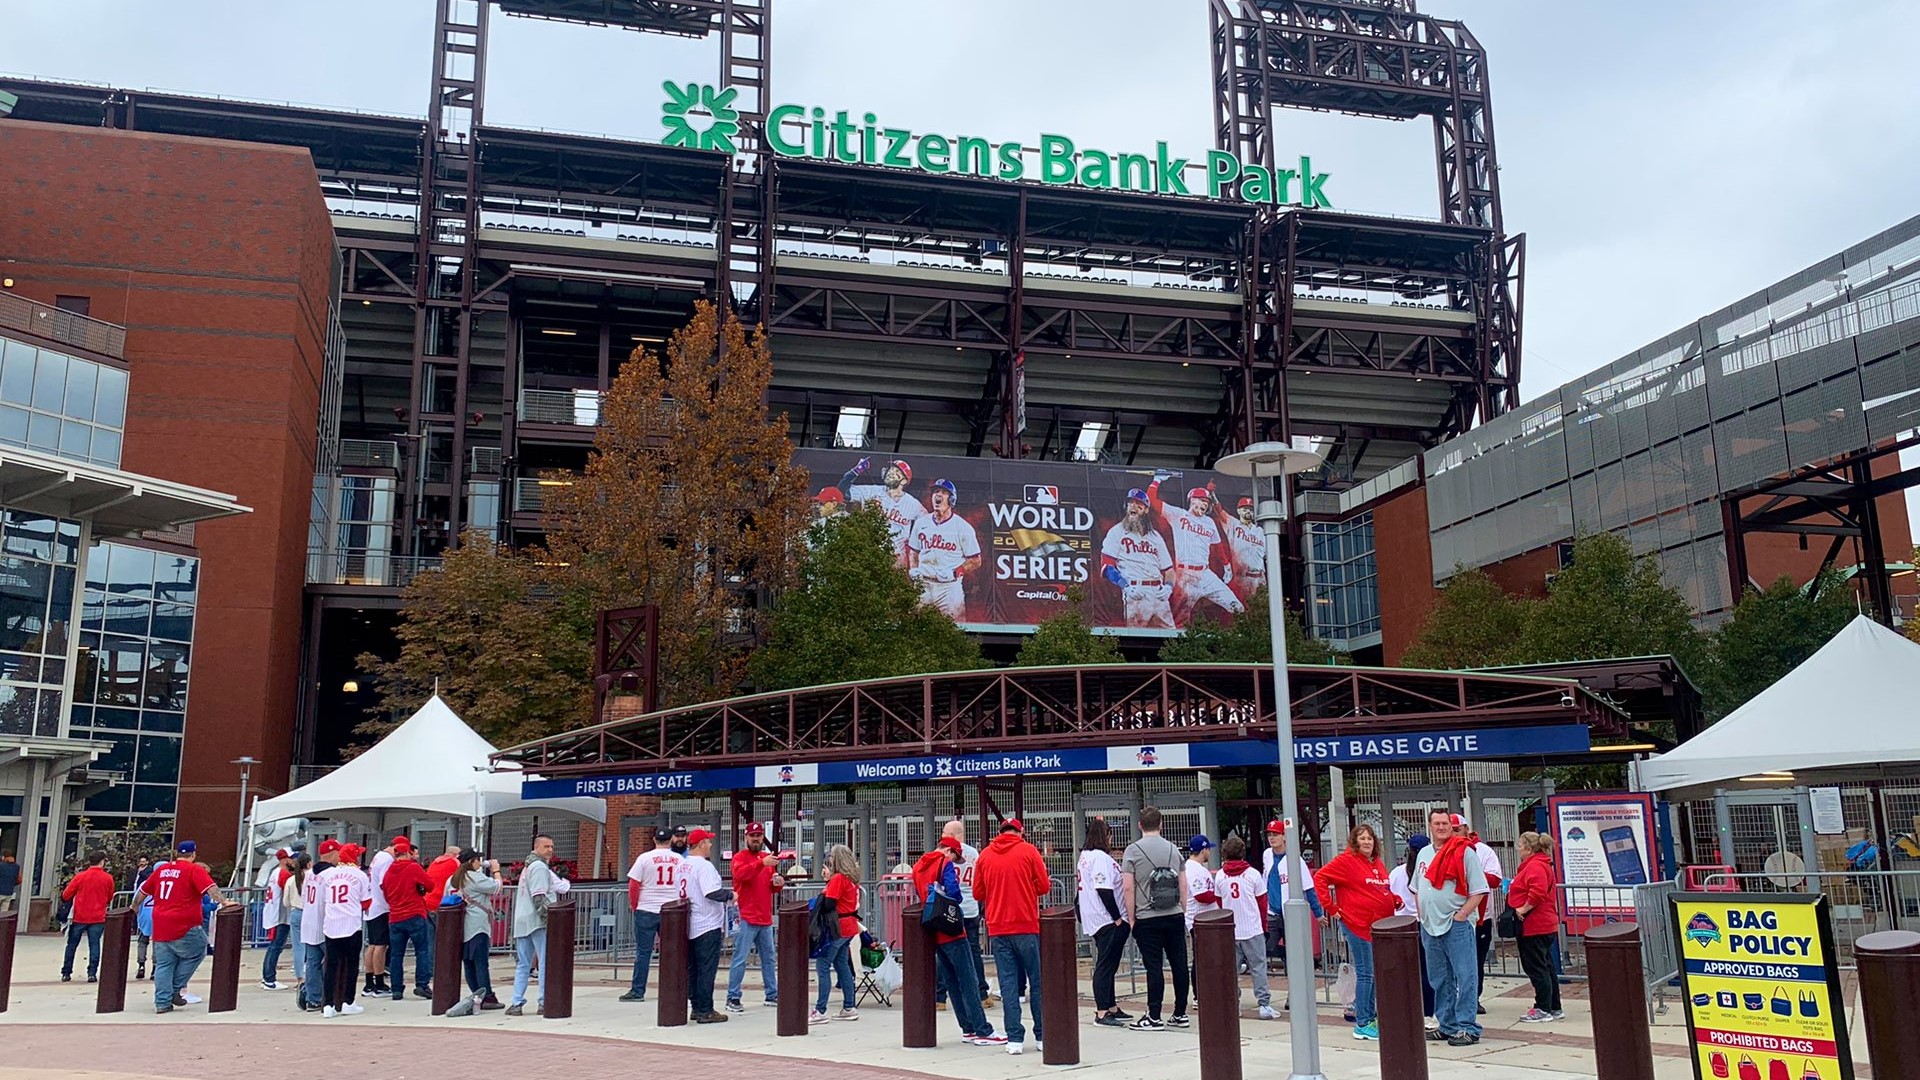 Getting a preview of Game 3 of the World Series from Citizens Bank Park